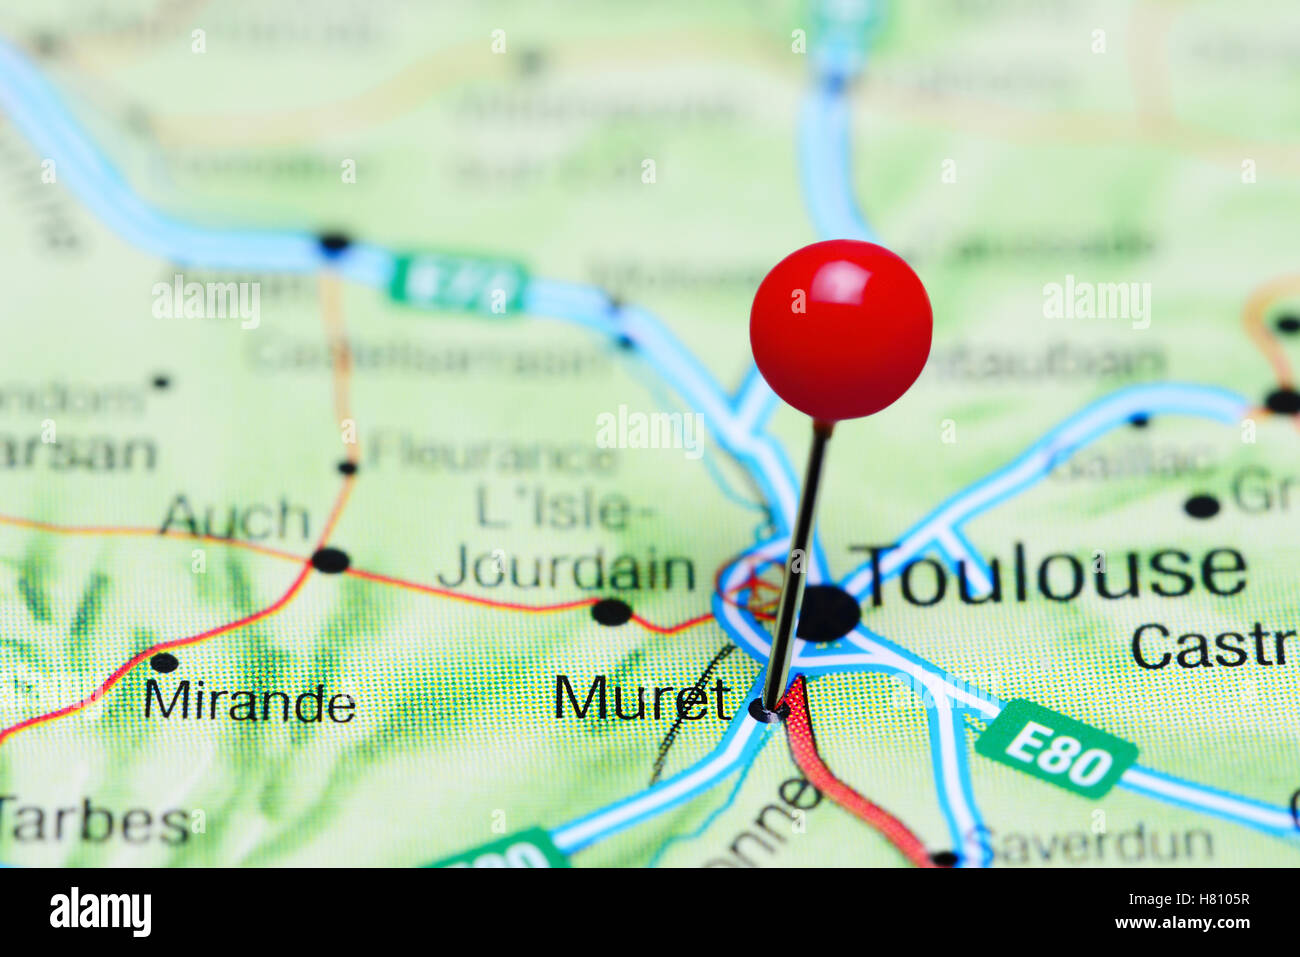 Muret pinned on a map of France Stock Photo